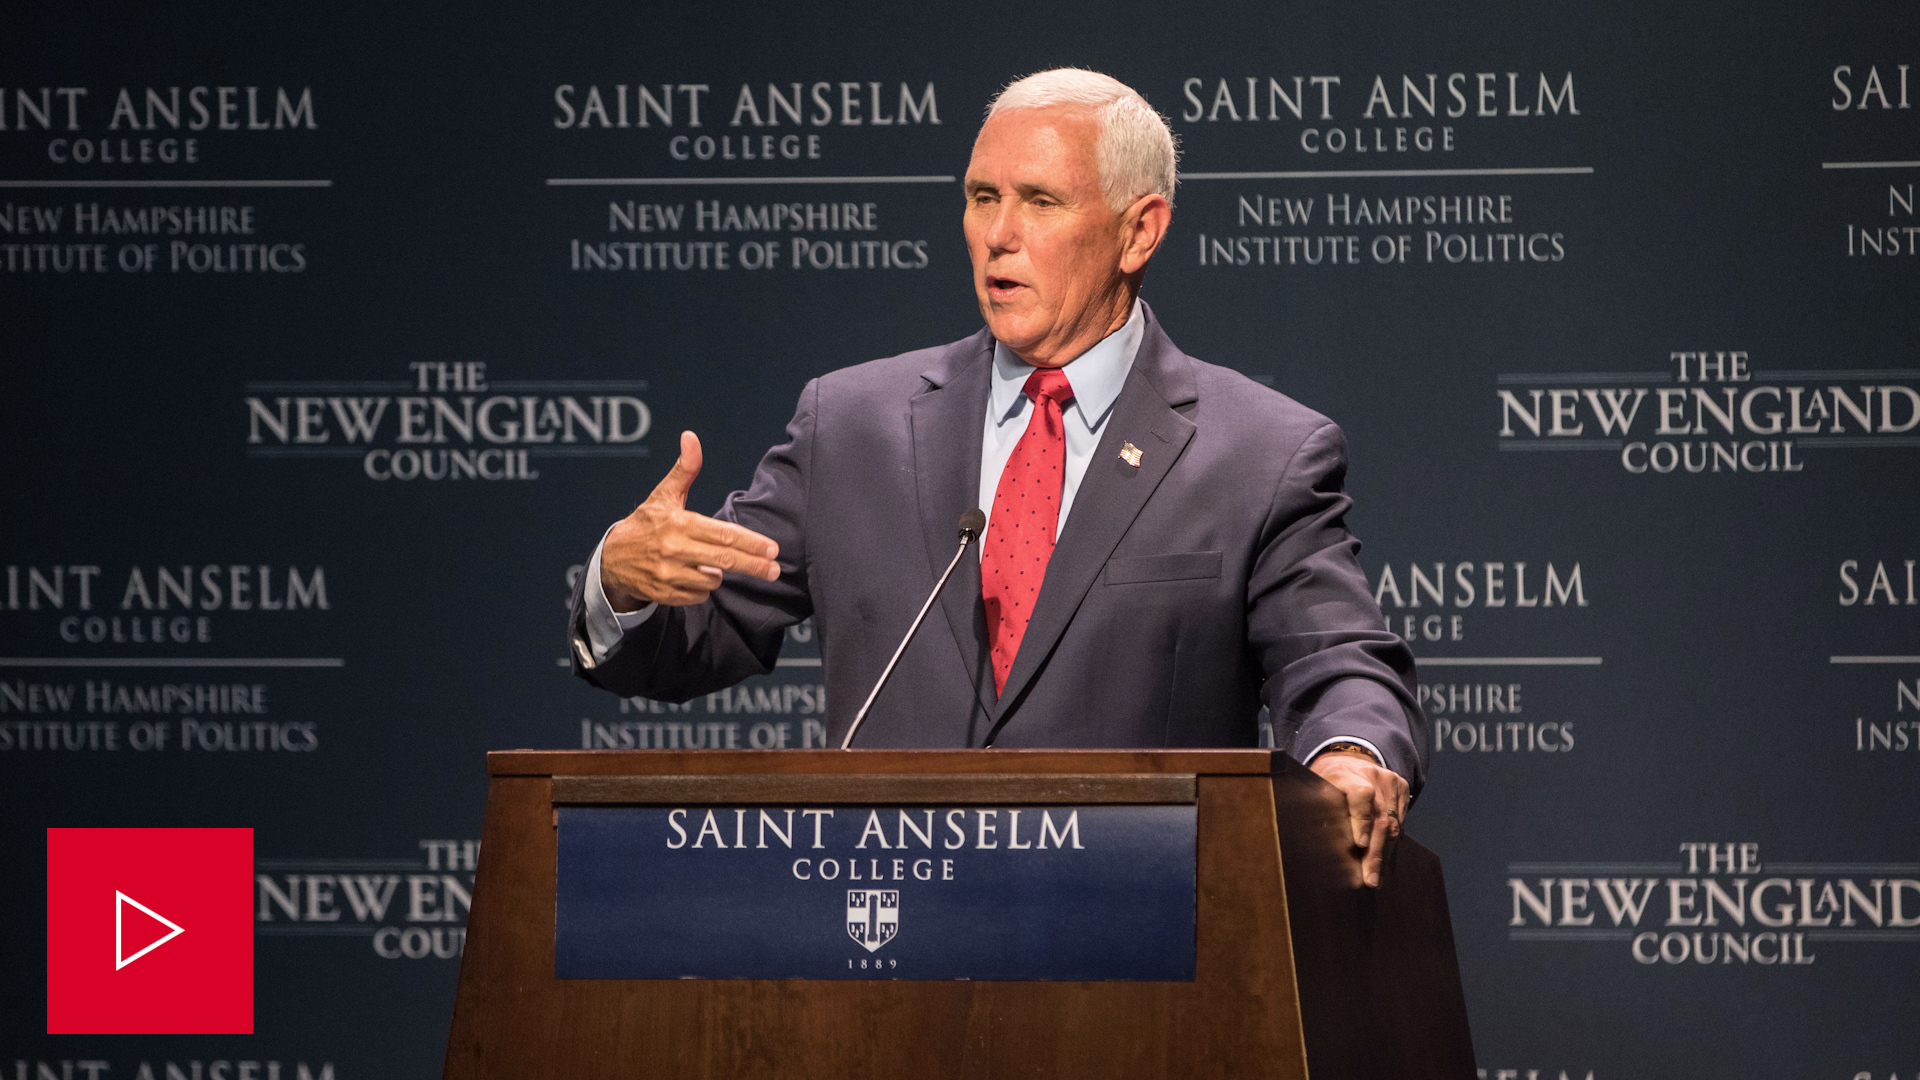 A video of Mike Pence speaking at a lectern. 